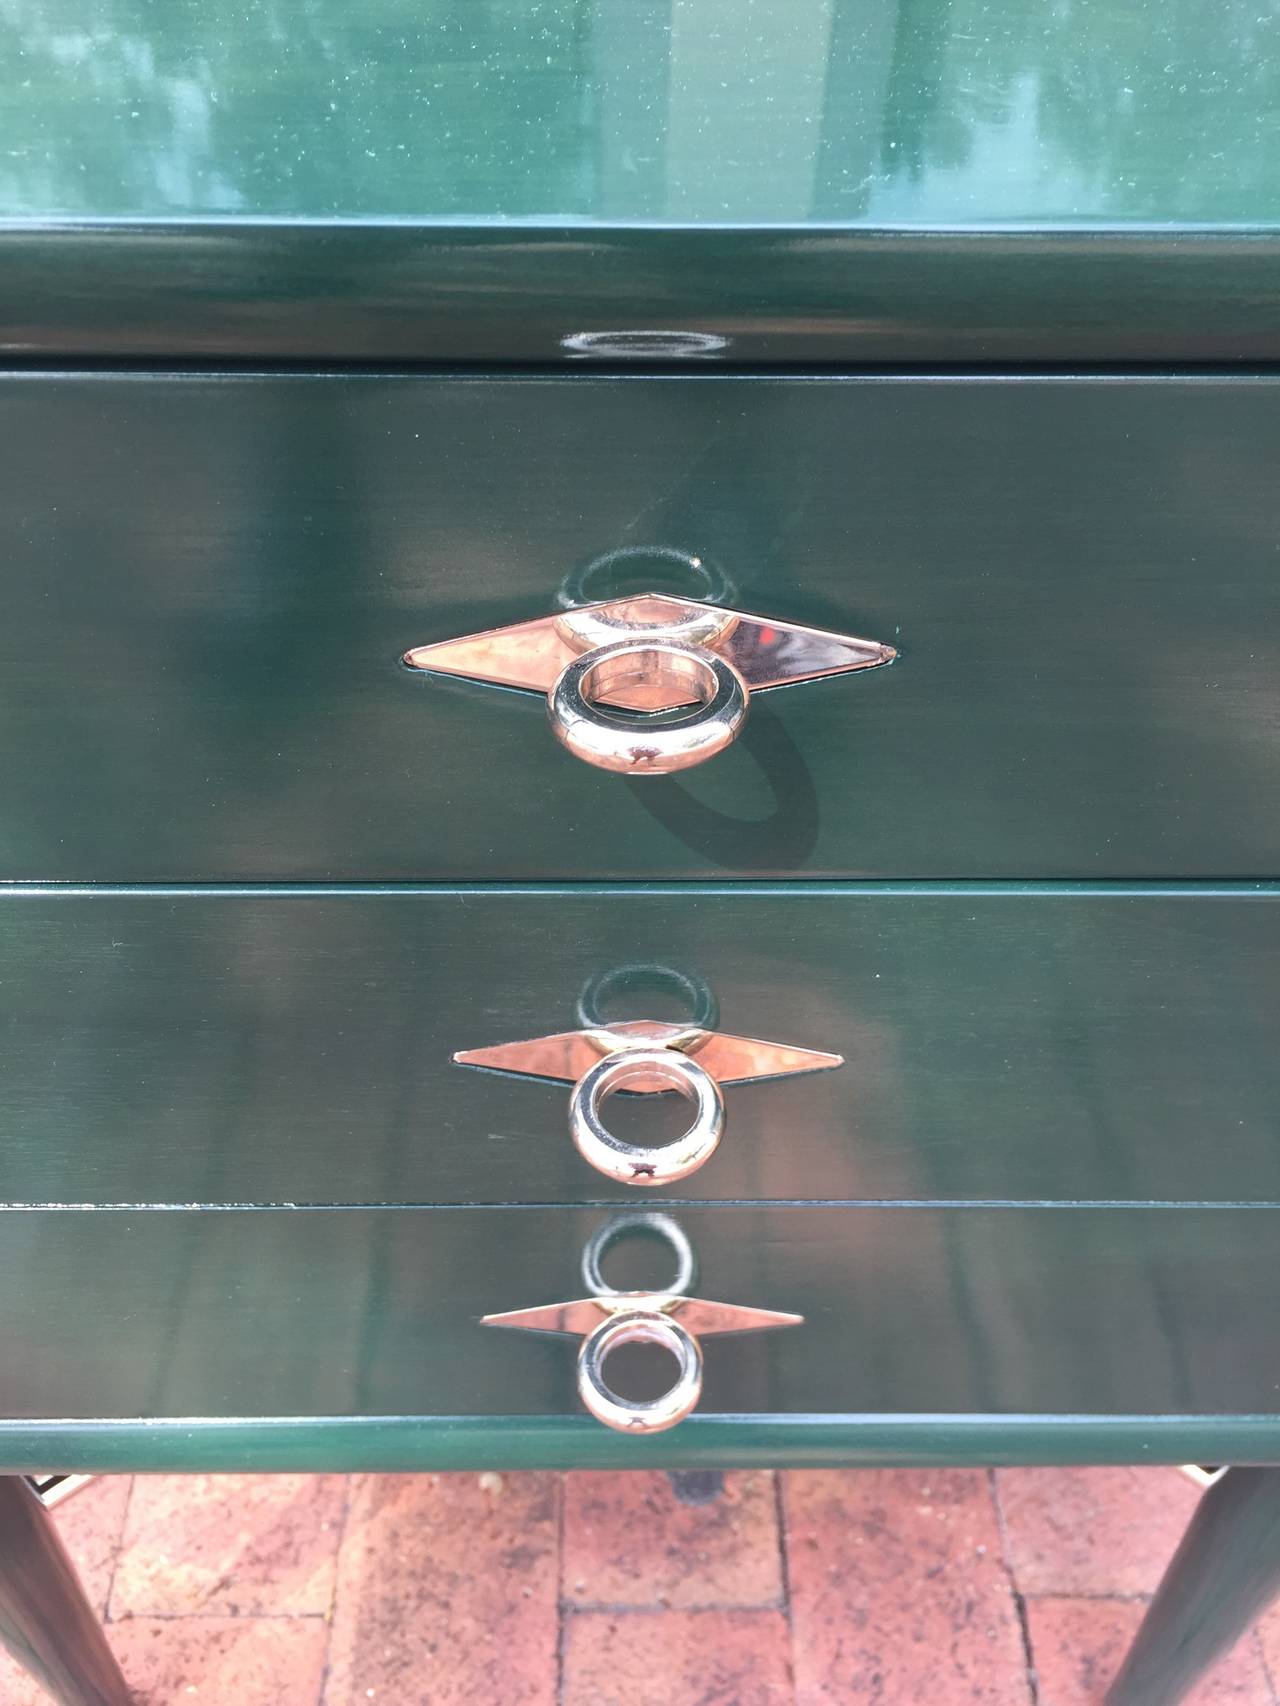 Beautiful nickel plated pulls and cross-stretchers - this simple , yet very stylish bedside cabinets are well crafted & nicely refinished.

2 Drawers (as shown in image 3)

This item is currently in our NYDC (10th floor) space. Please call or